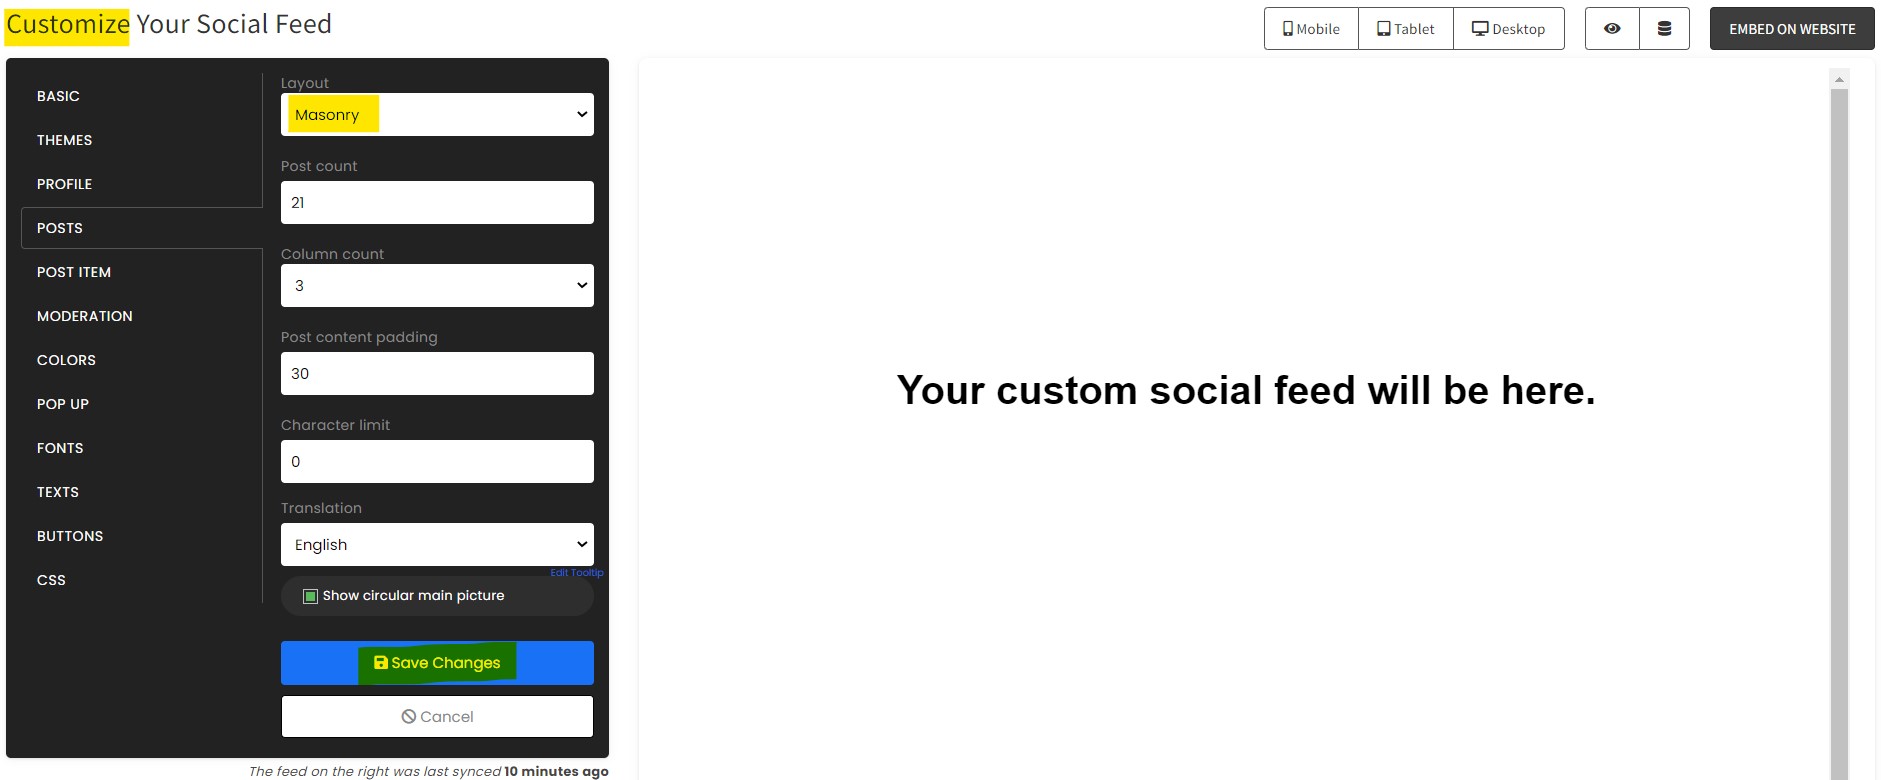 Customize your feed - How to embed Twitch feed on your Squarespace website for FREE?